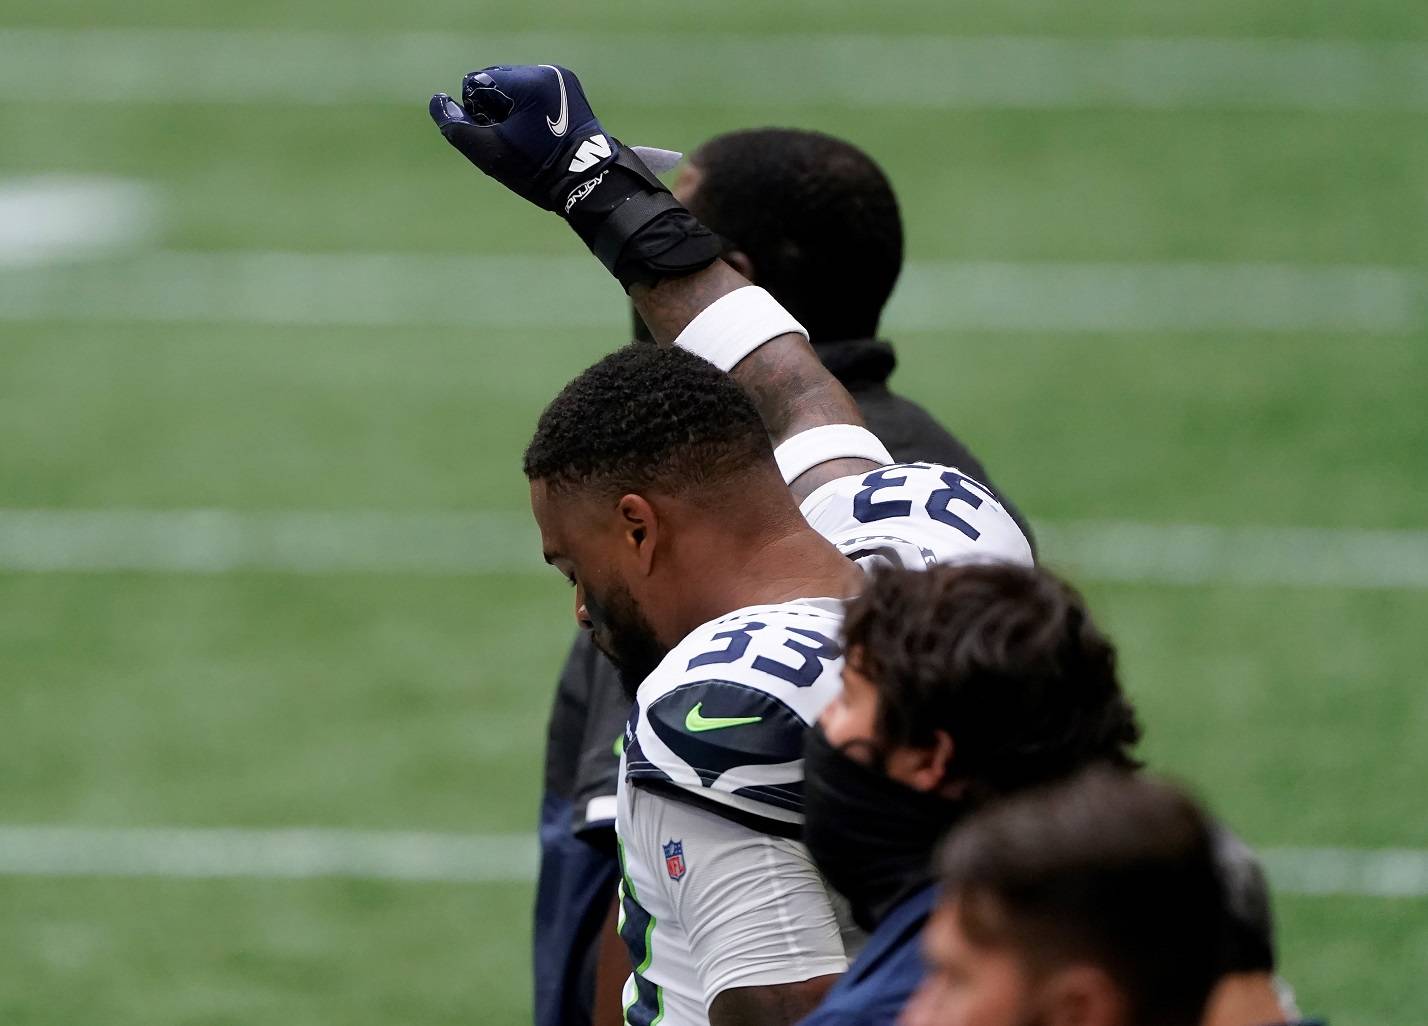 Seattle Seahawks strong safety Jamal Adams participates in the national anthem before a game against the Atlanta Falcons on Sunday in Atlanta. (John Bazemore/Associated Press)